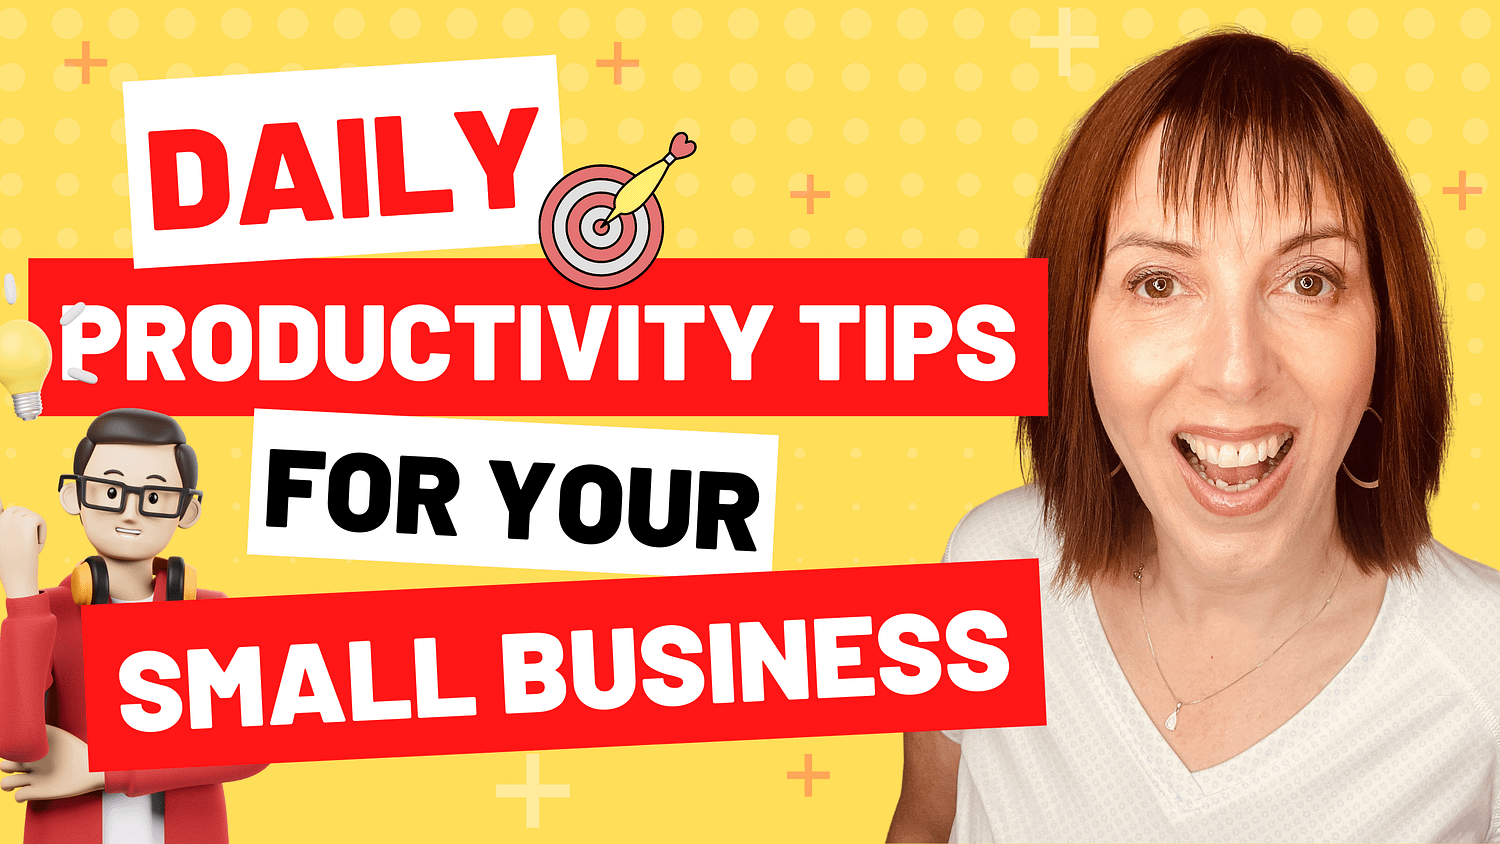 Daily Productivity Tips For Your Small Business!